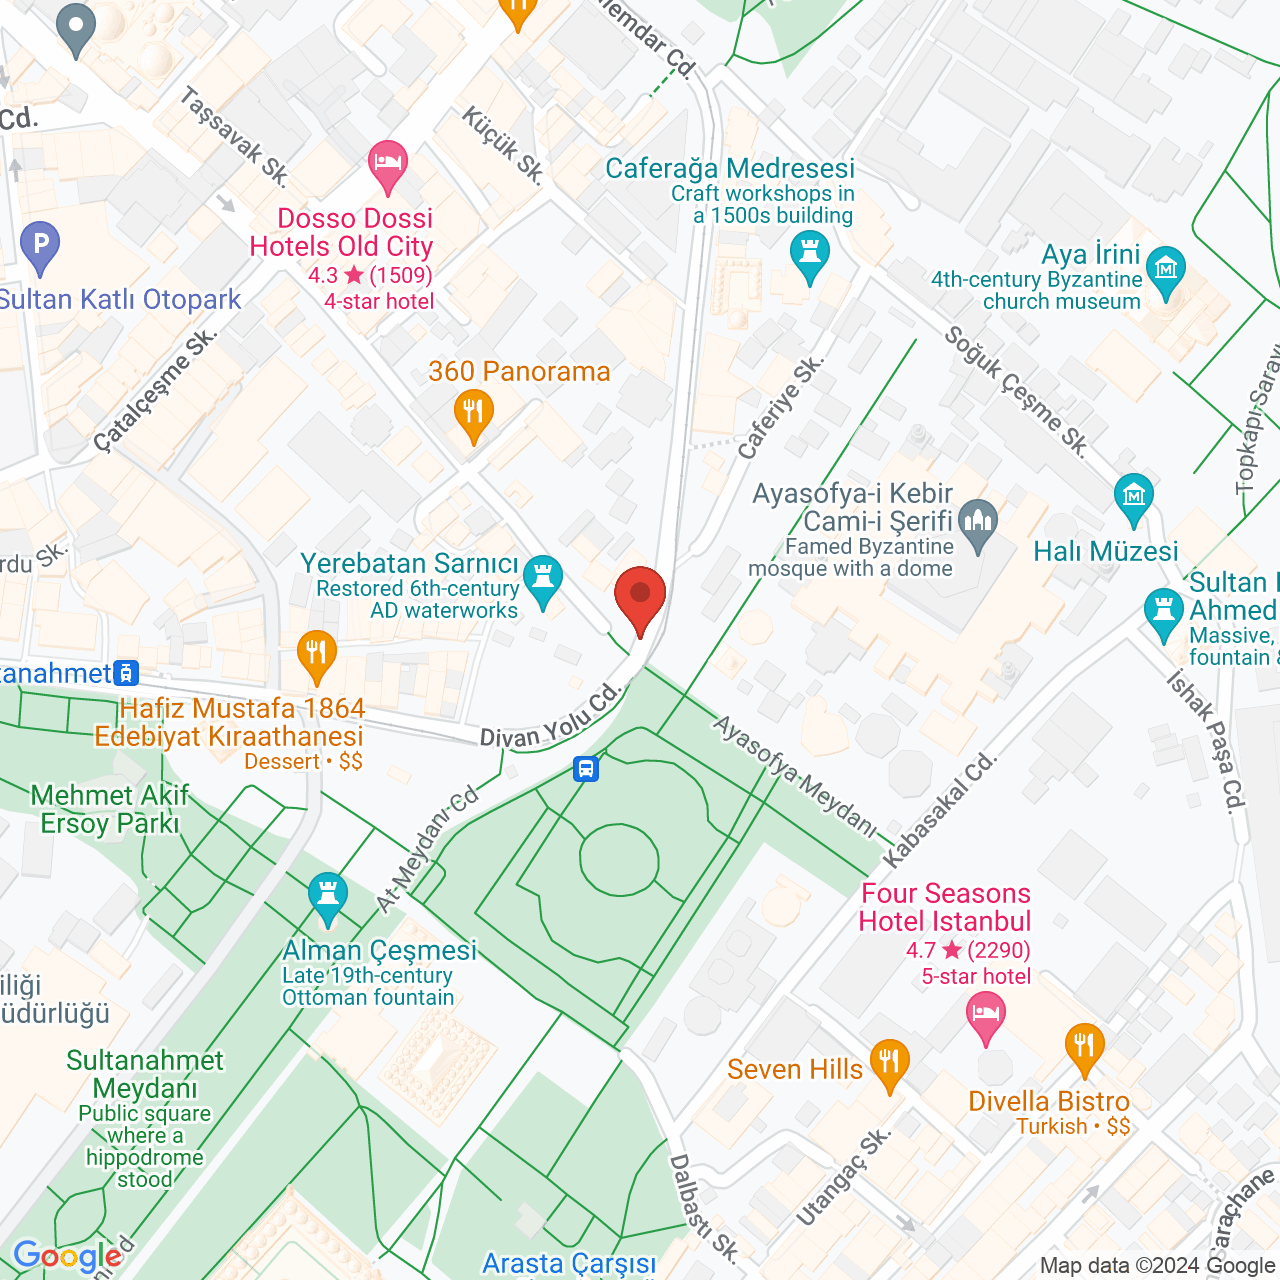 https://maps.googleapis.com/maps/api/staticmap?zoom=10&maptype=hybrid&scale=4&center=41.0082376,28.9783589&markers=color:red%7C%7C41.0082376,28.9783589&size=1000x1000&key=AIzaSyAQg6Liu52-a7wn17F9B-5c4QmJ9kTO3Mo